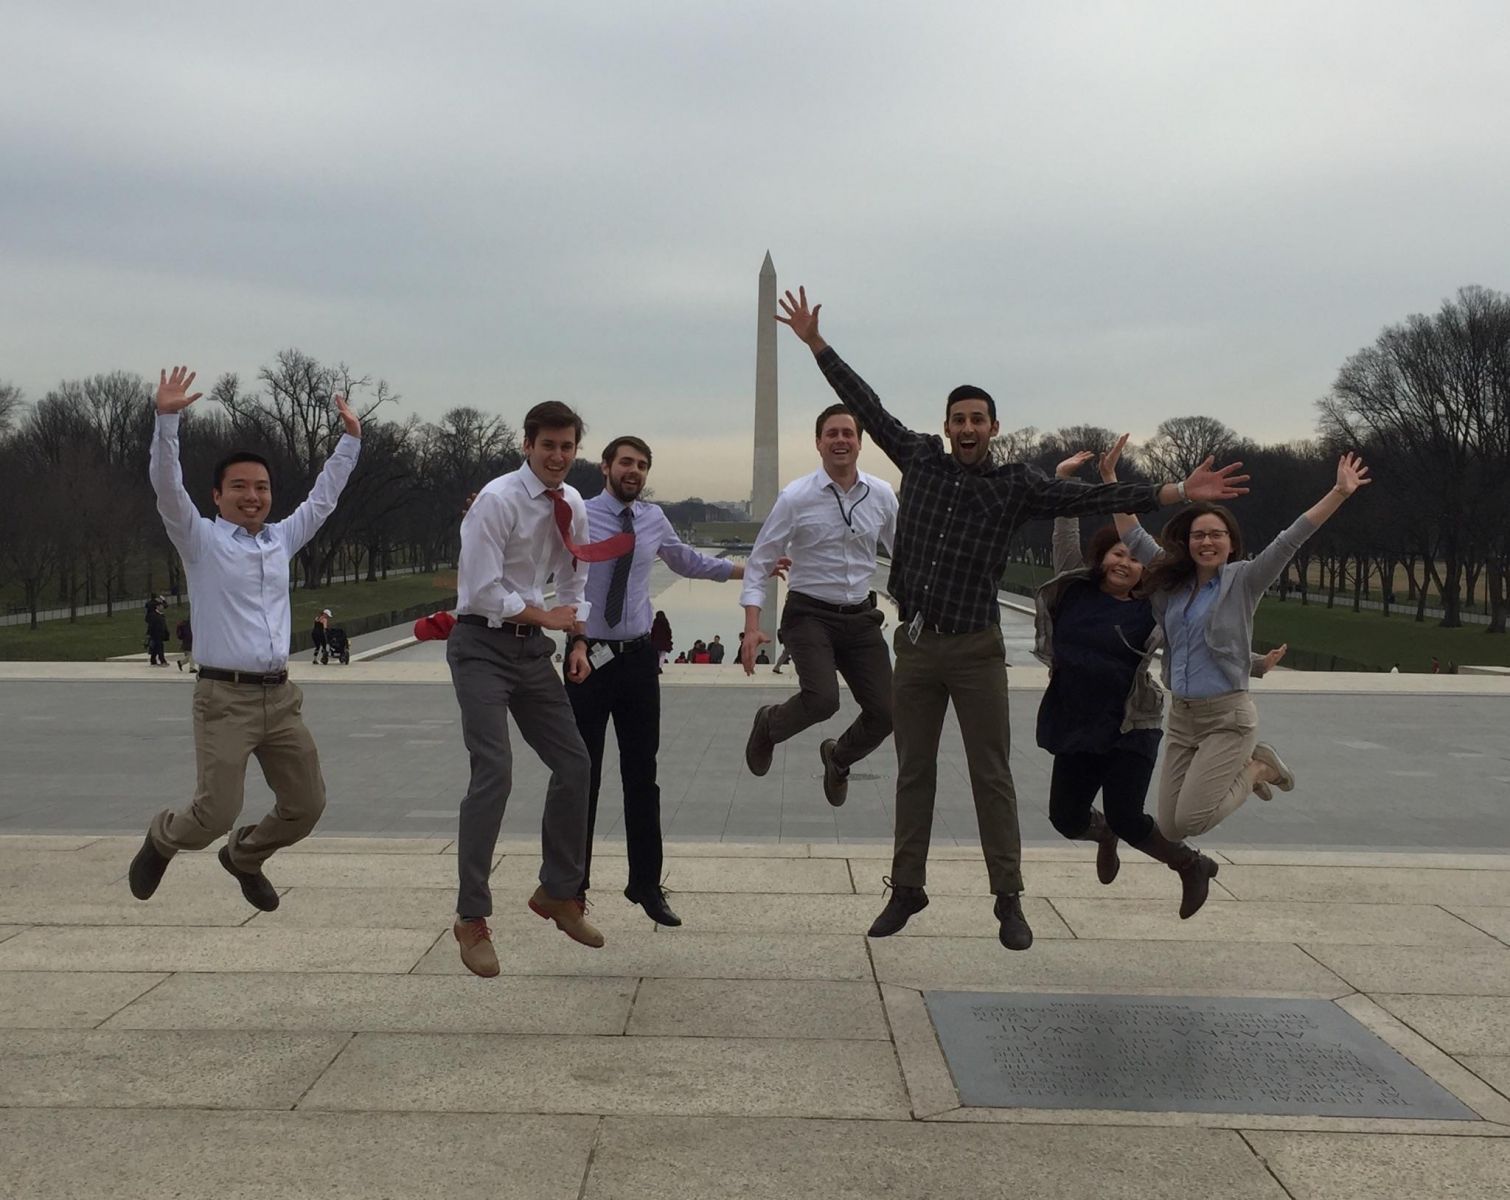 Students jumping of joy near the reflecting pool